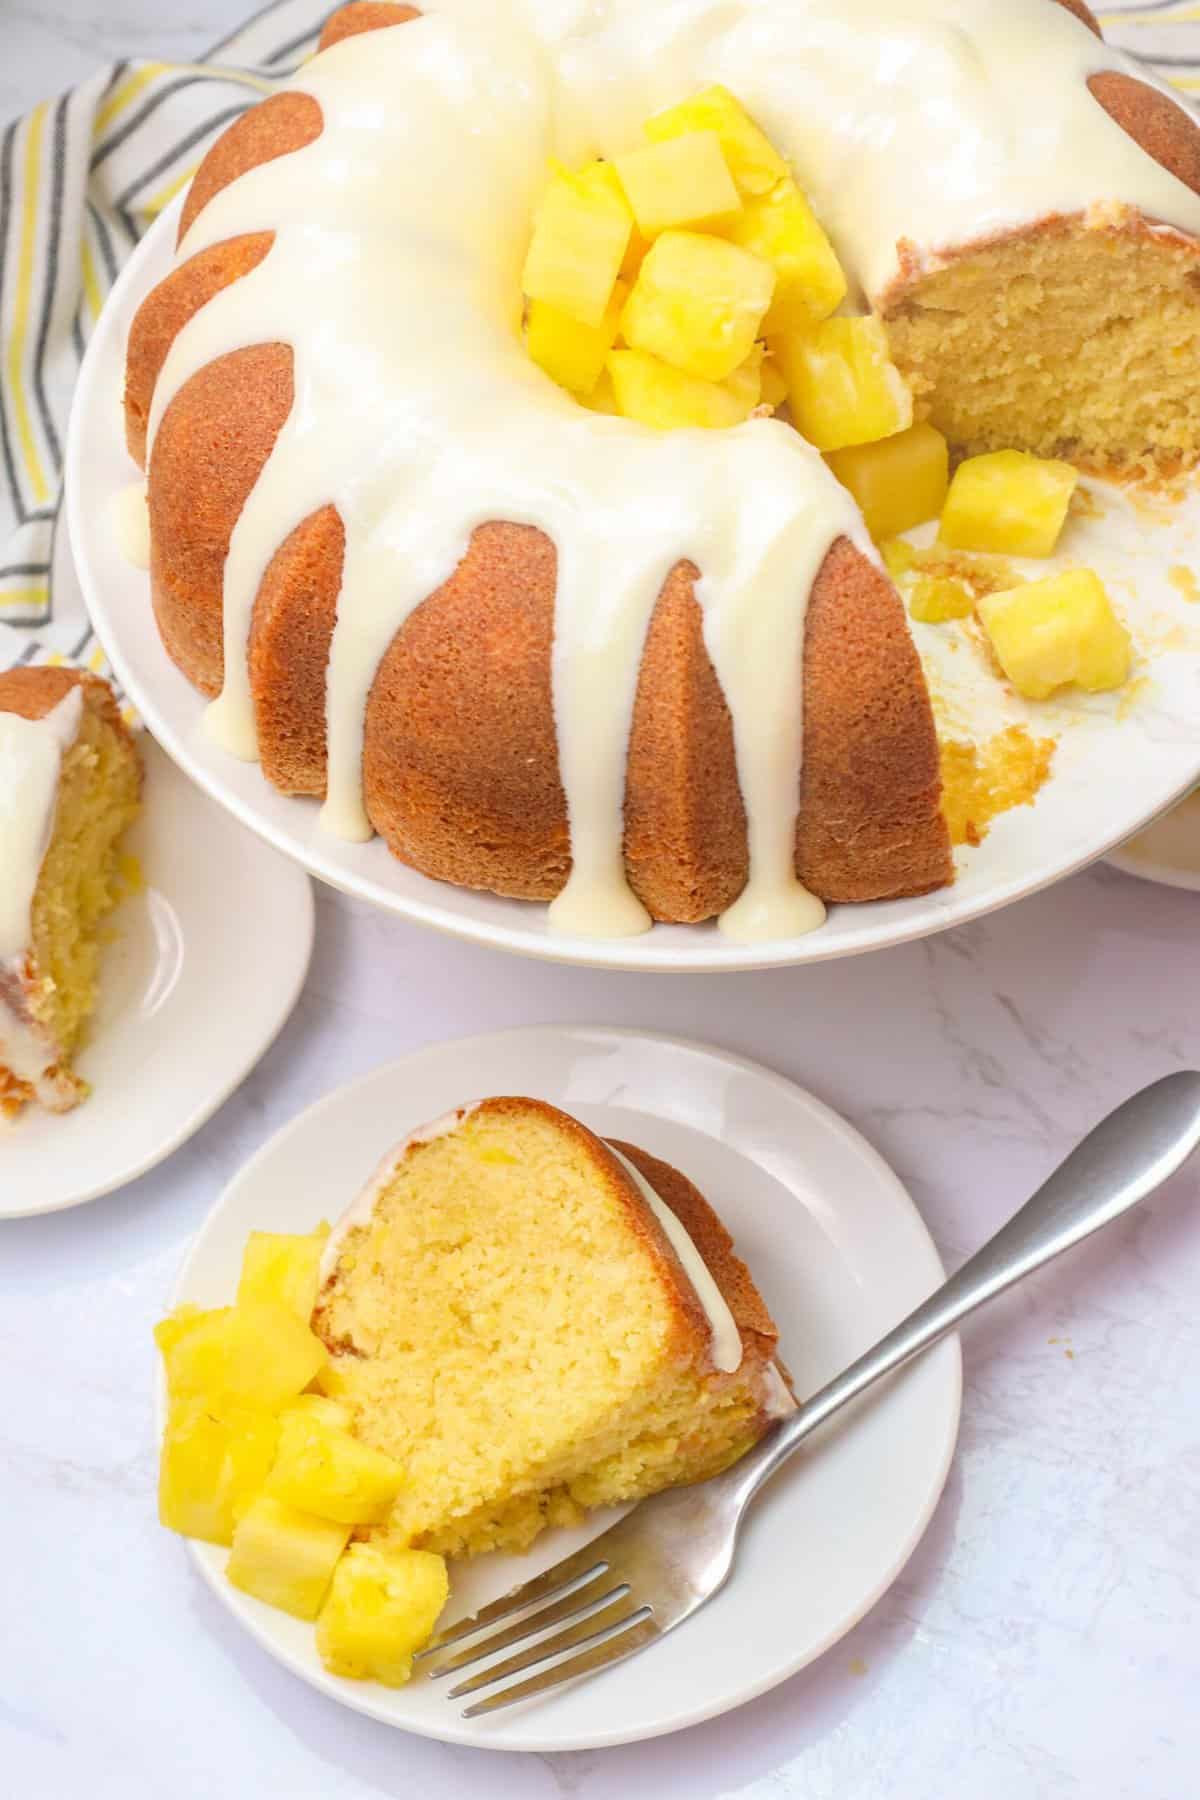 Serving up a slice of insanely delicious pineapple pound cake with extra chunks of pineapple